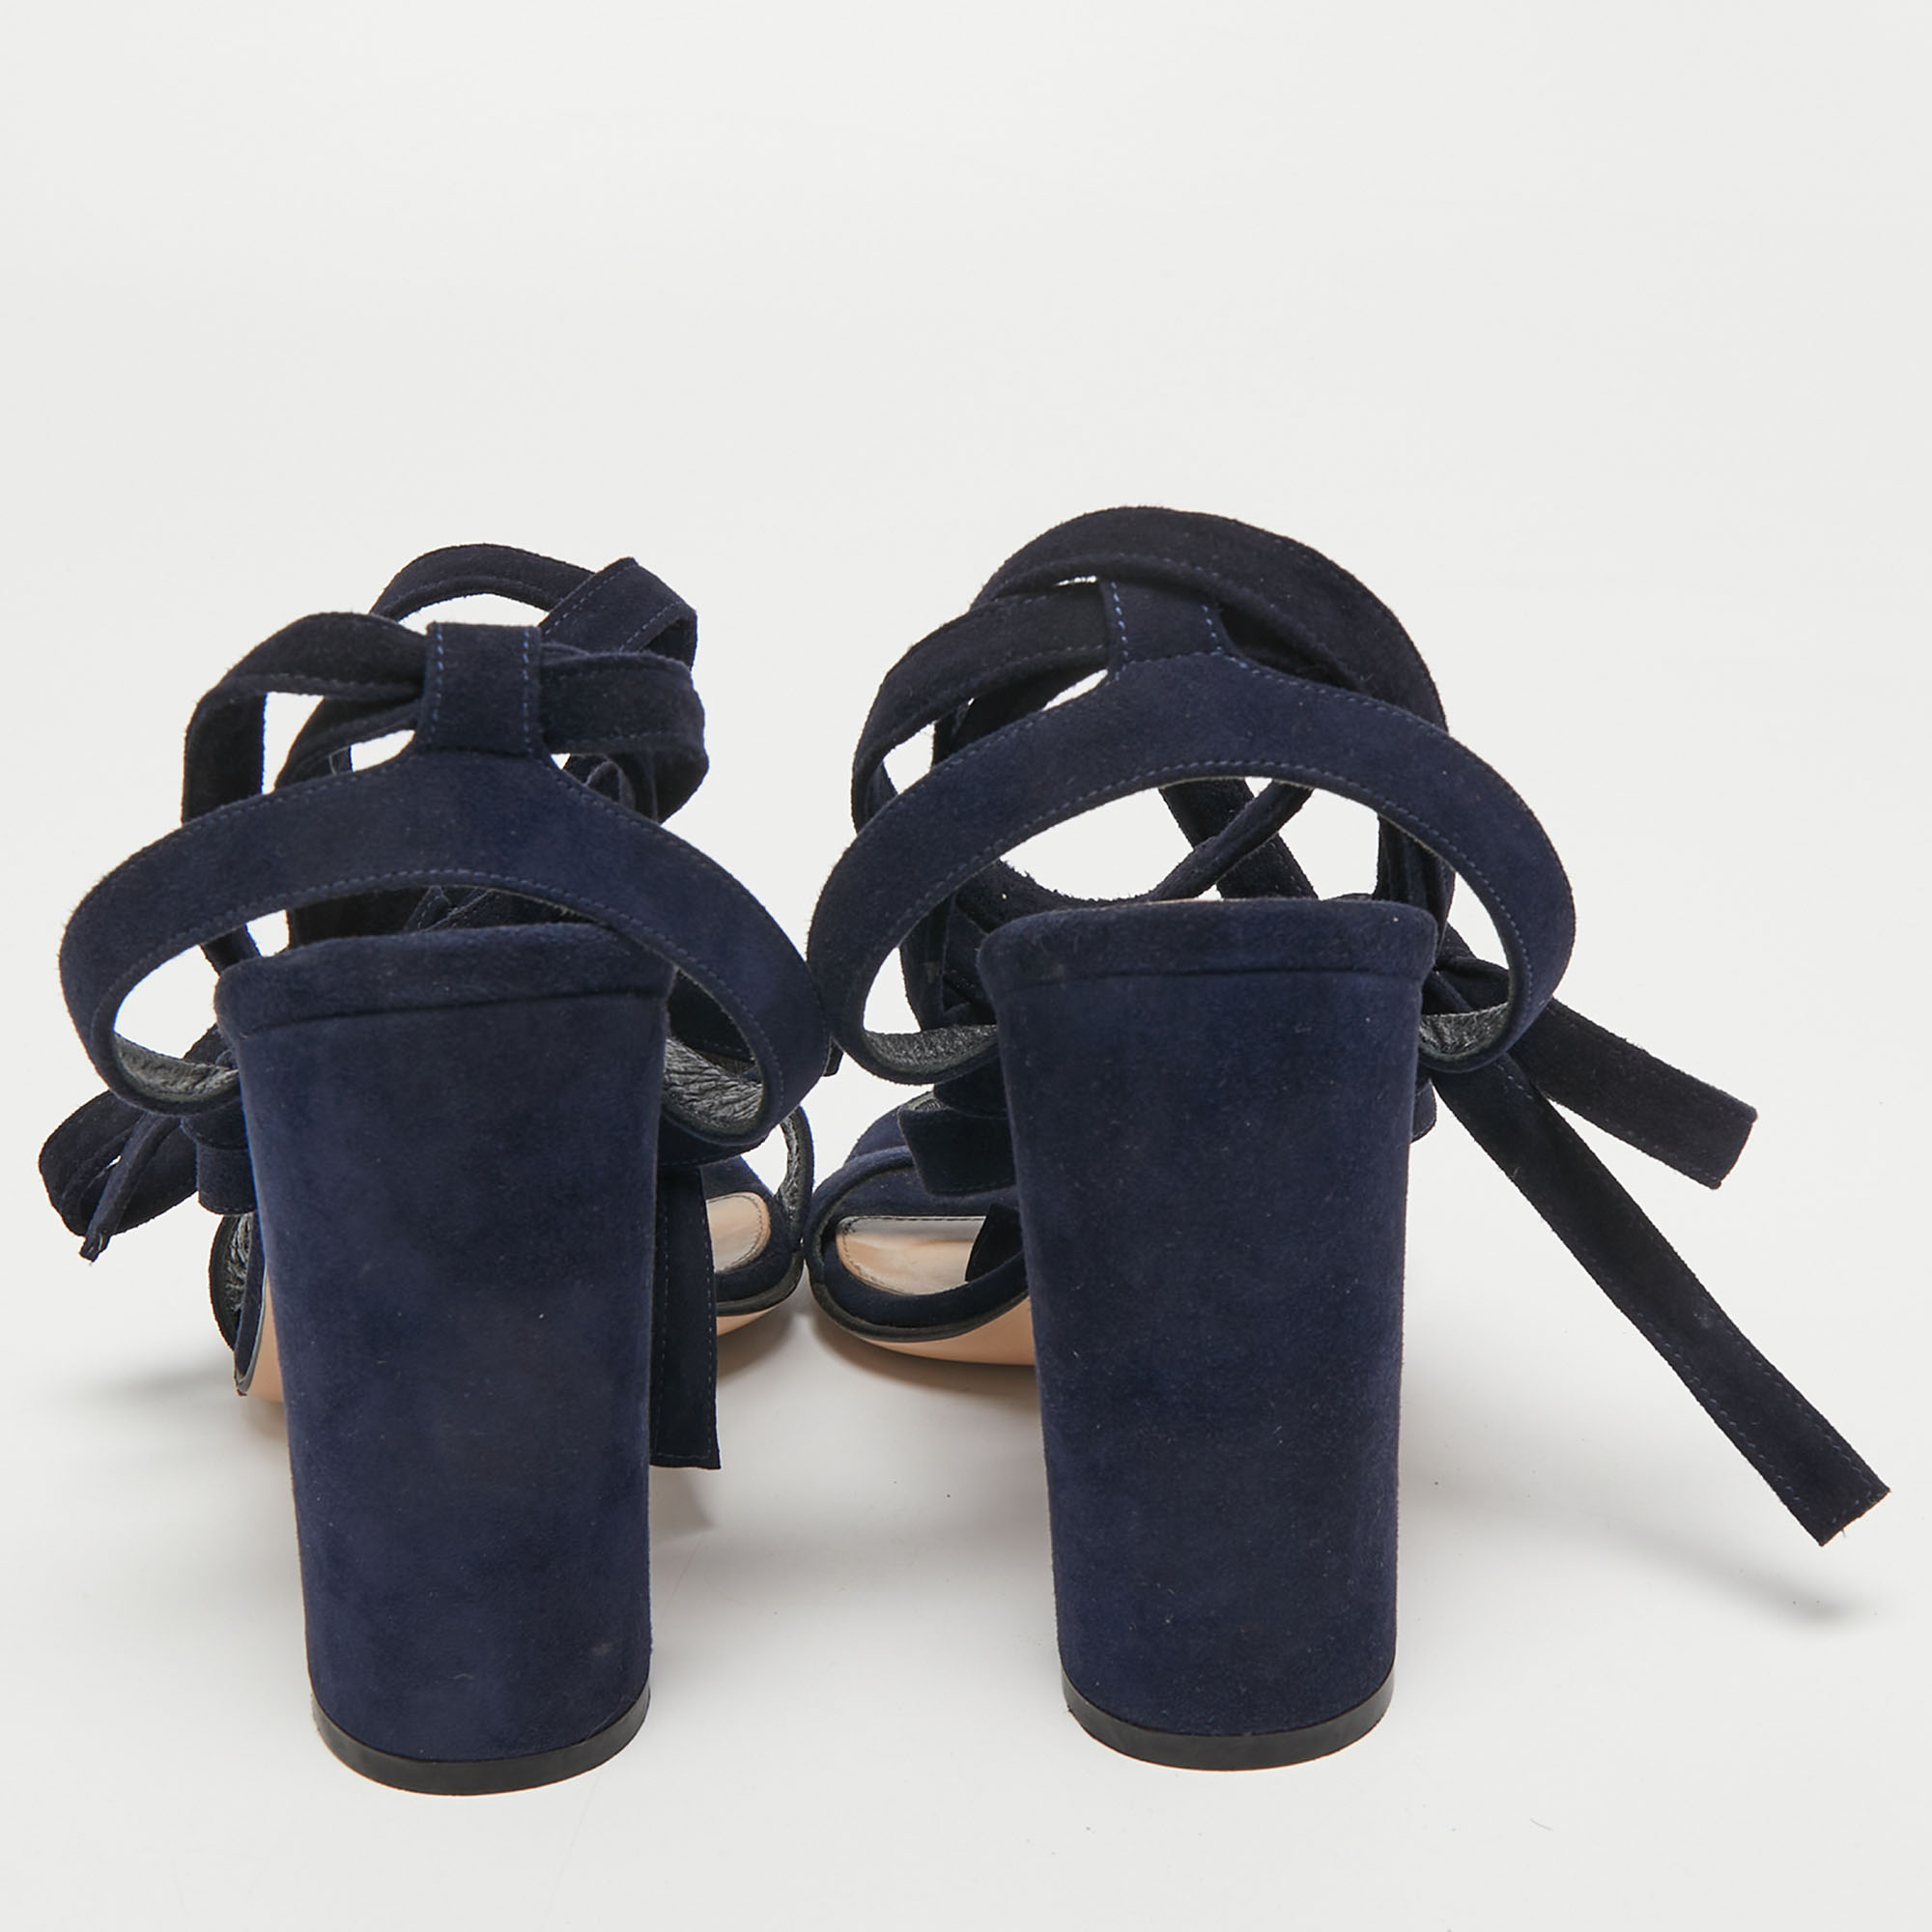 Gianvito Rossi Navy Blue Suede Ankle Wrap Sandals Size 40